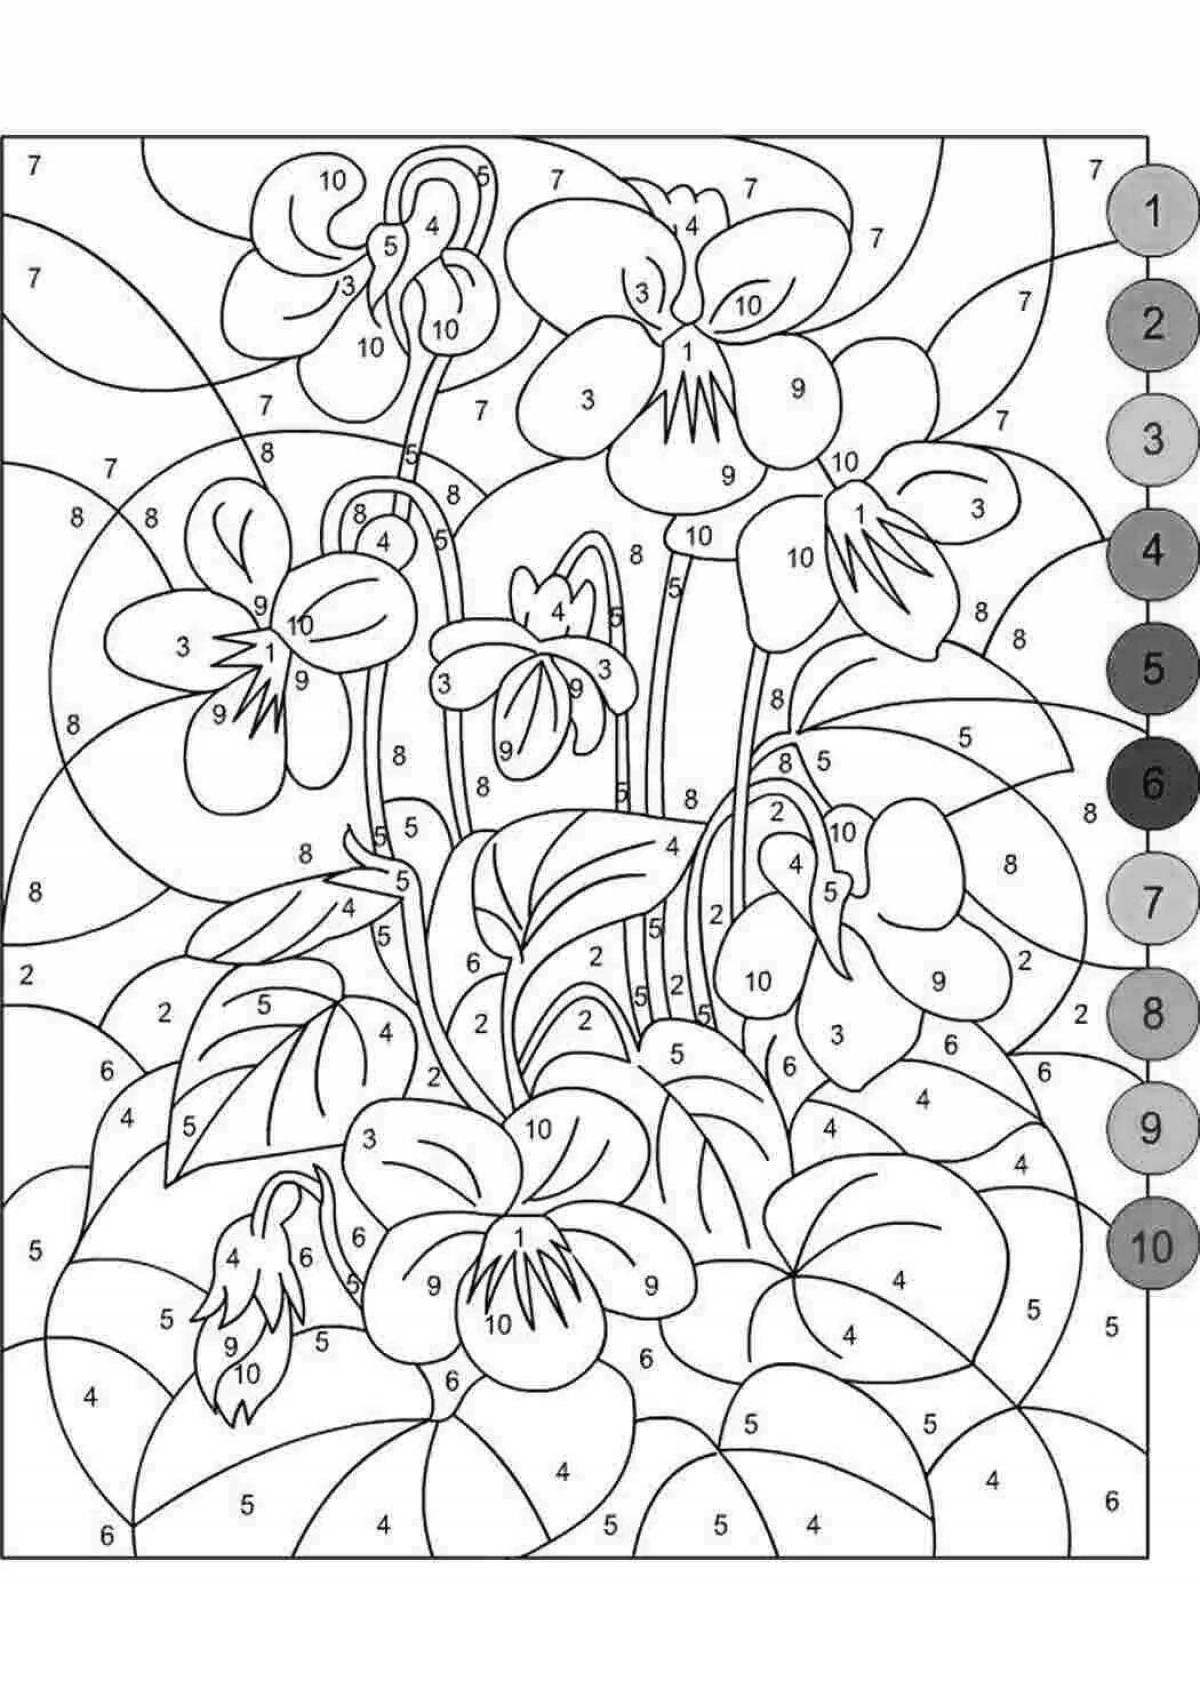 Coloring page for funny numbers